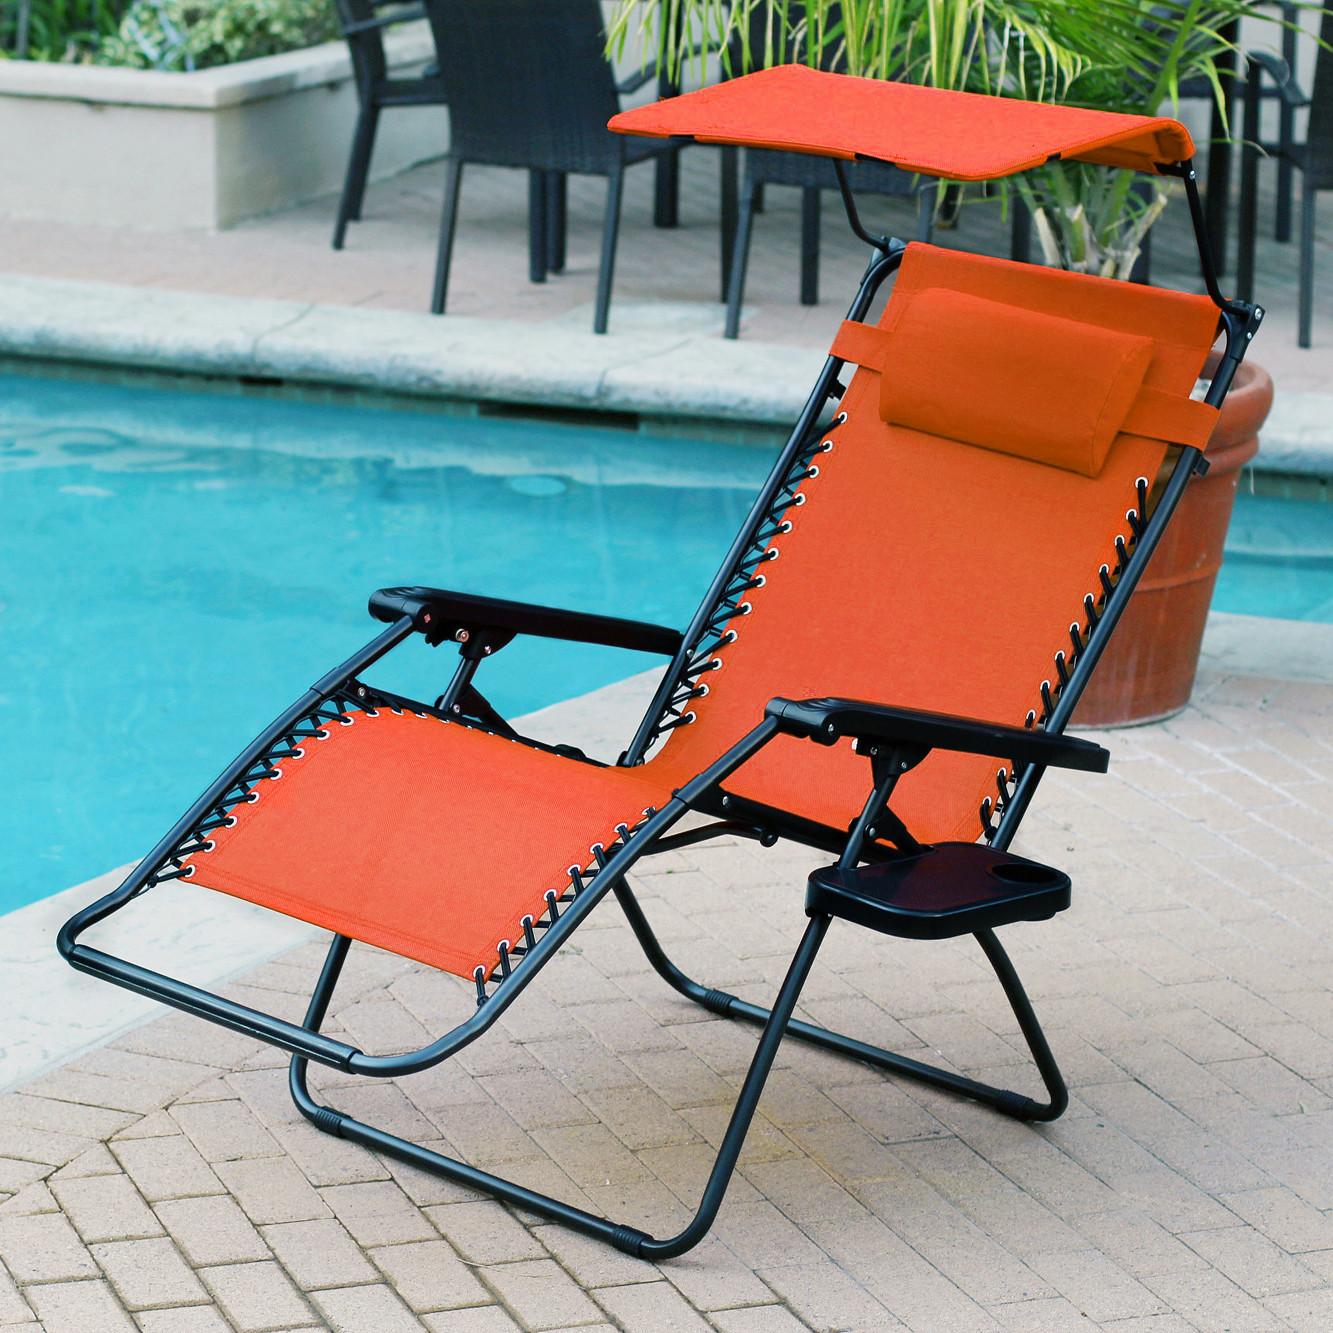 Zero Gravity Rocking Chair Unique Rst Outdoor orbital Outdoor Lounger Review Gallery  Interesting Picture Of The Chair